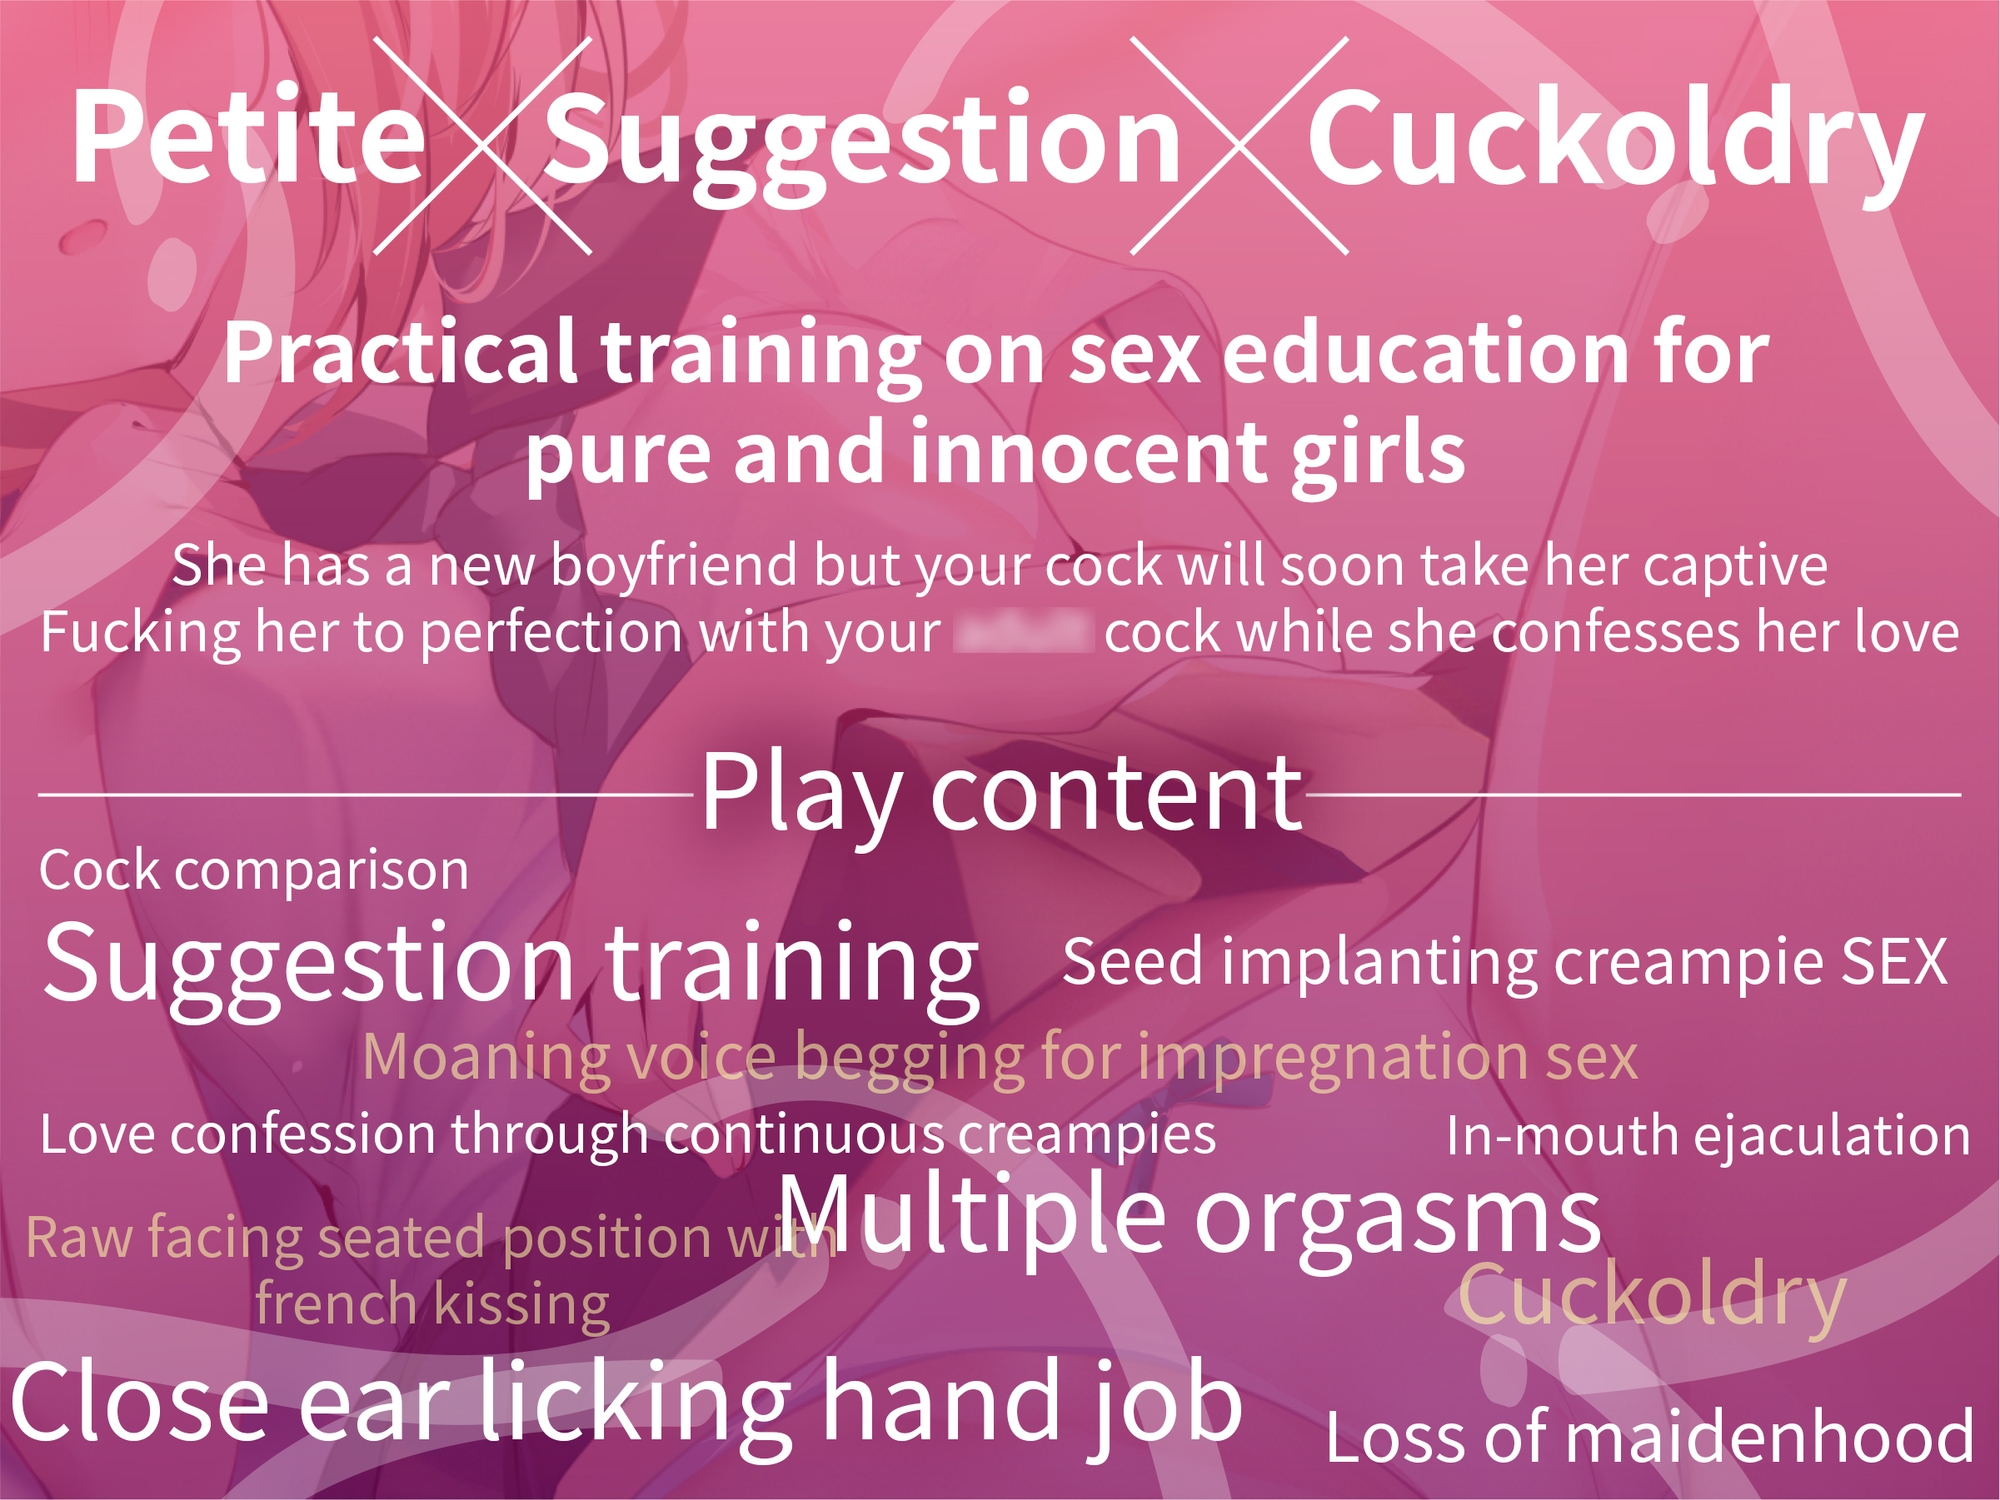 ENG Ver[Petite x Suggestion x Cuckoldry] Suggestion Sex Education Practical Training for Innocent Girls Using Suggestion Apps